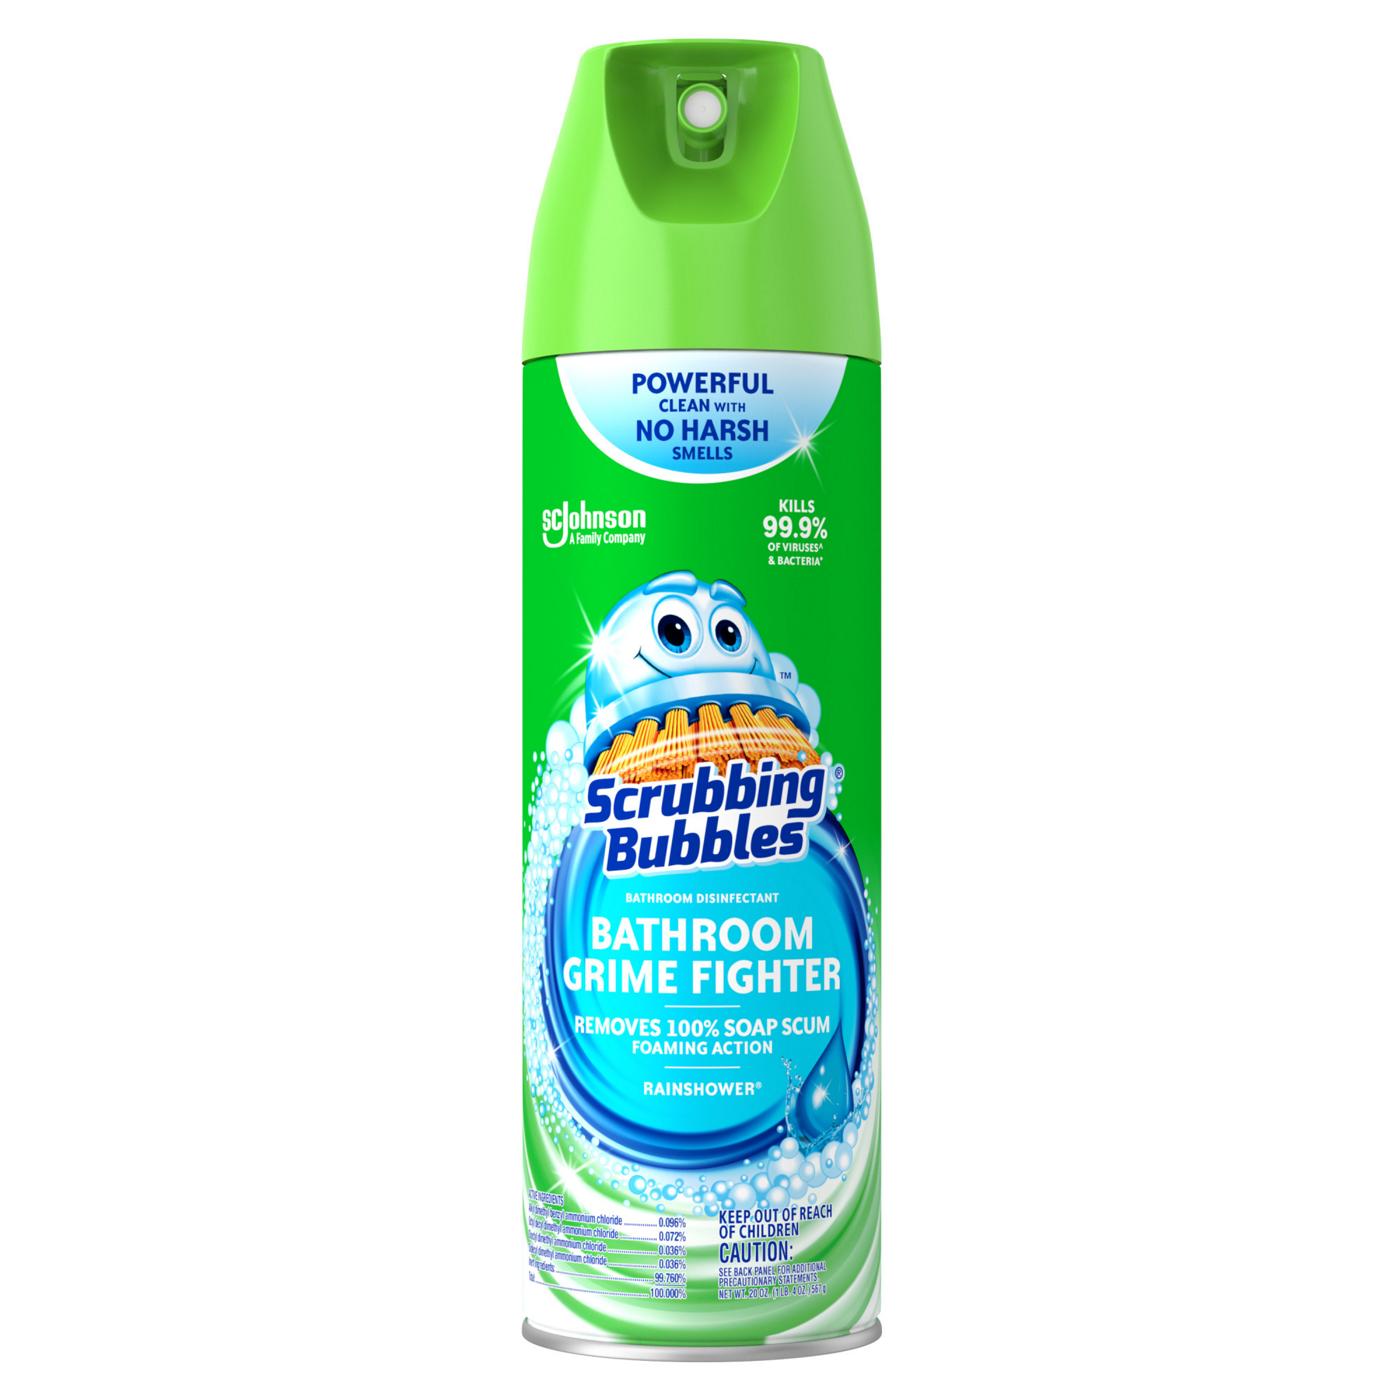 Scrubbing Bubbles Rainshower Scent Bathroom Cleaner; image 1 of 10